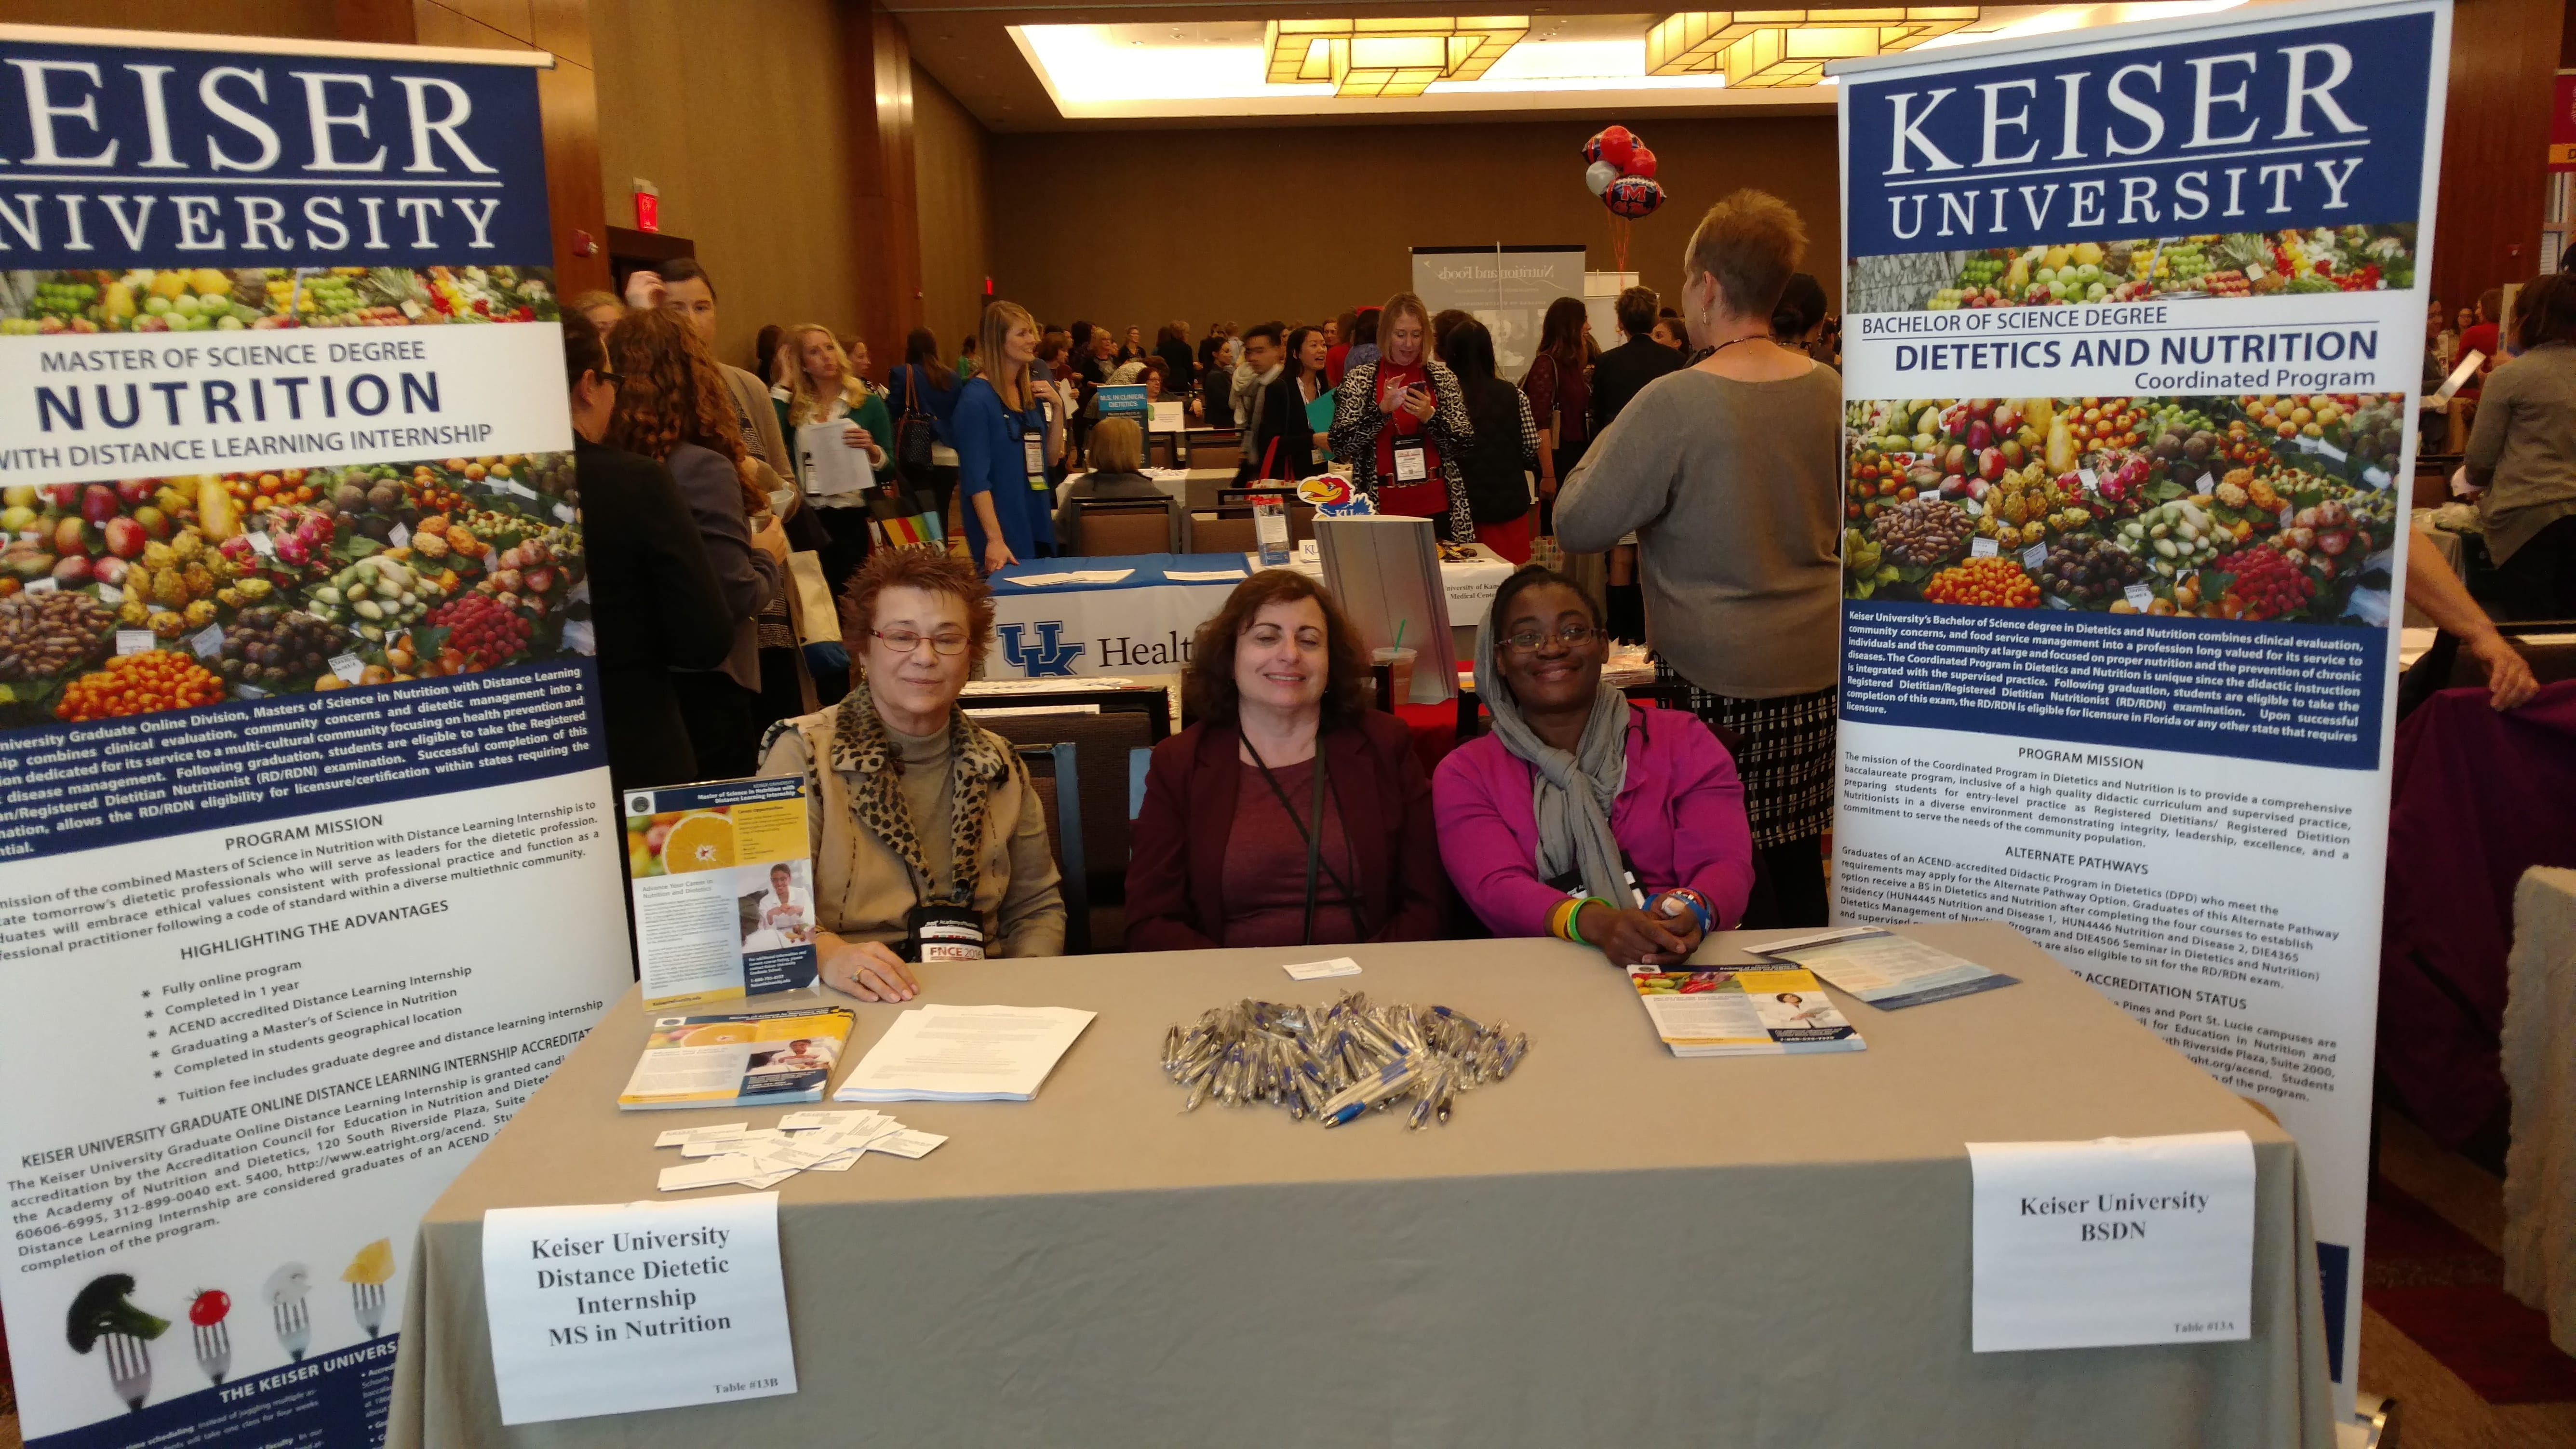 Keiser University is Represented at The Food and Nutrition Conference and Expo